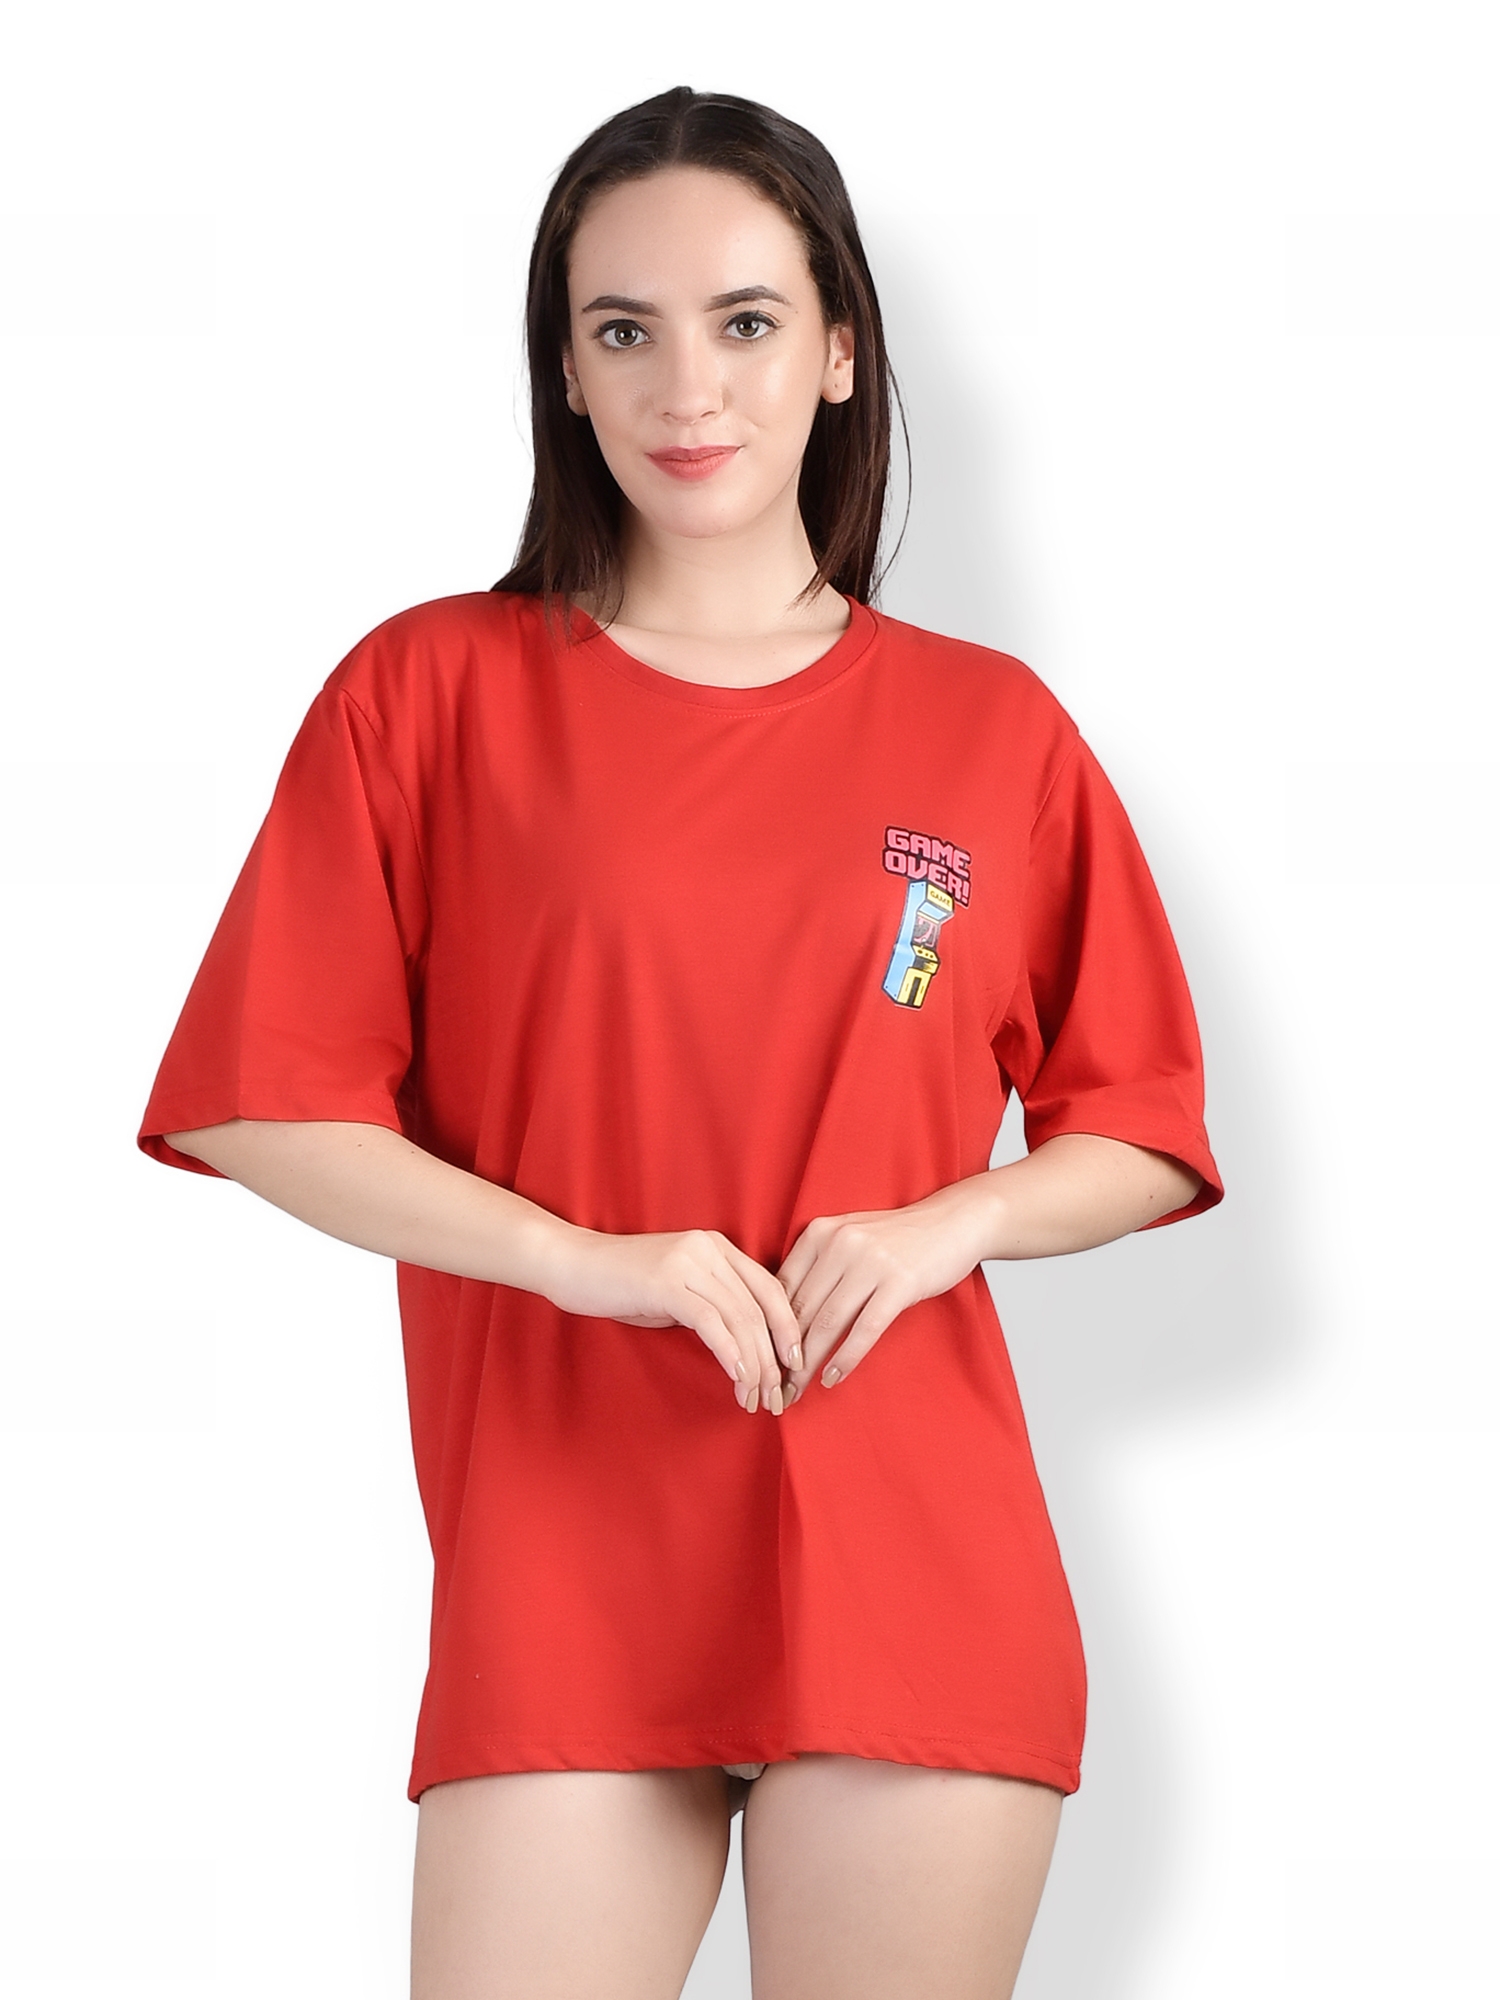 Game Over : Quirky Printed Oversized Women's Tees In Red Color